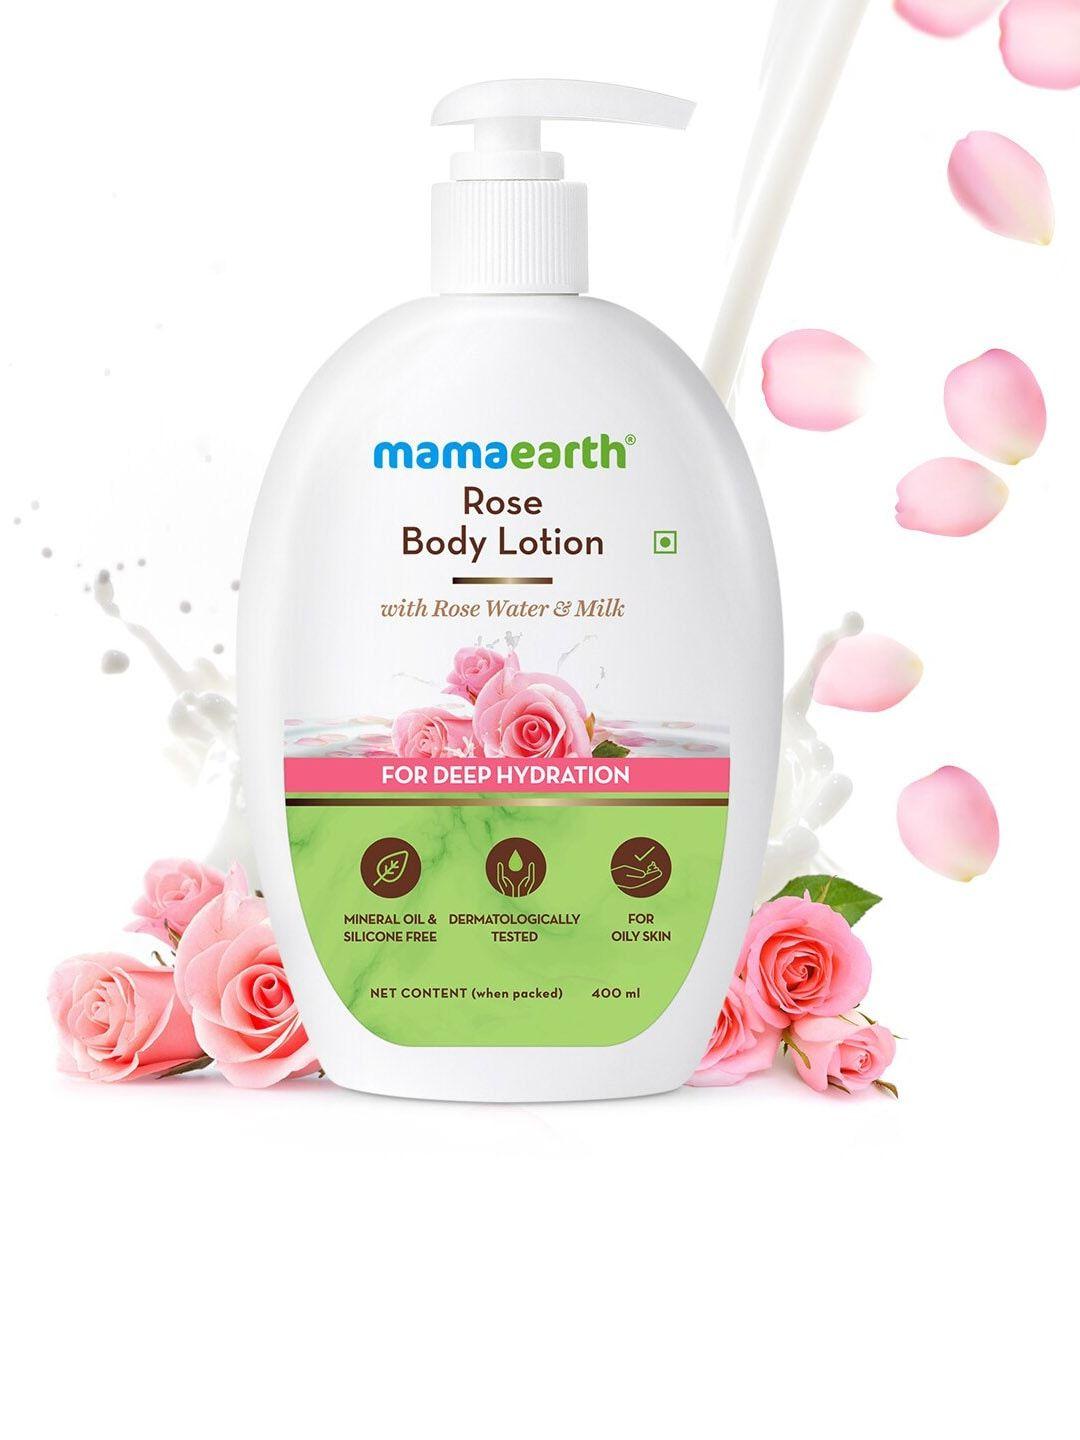 mamaearth rose body lotion with rose water & milk for deep hydration 400 ml